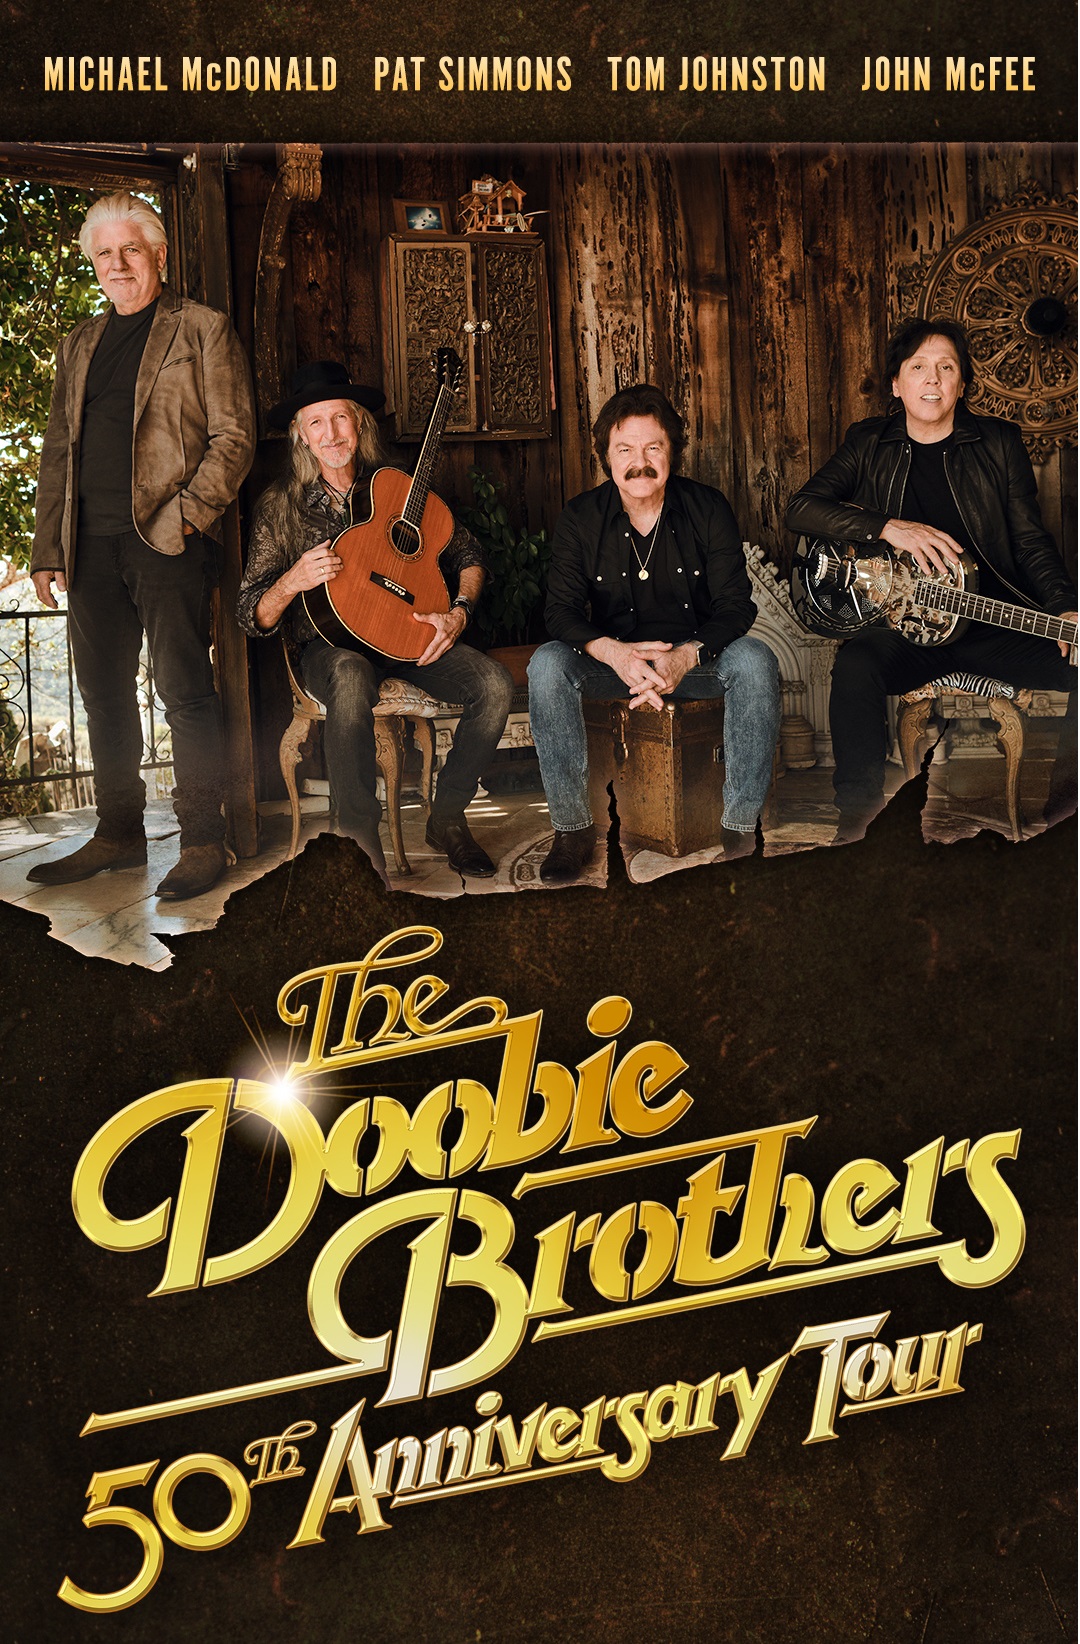 doobie brothers 50th anniversary tour song list